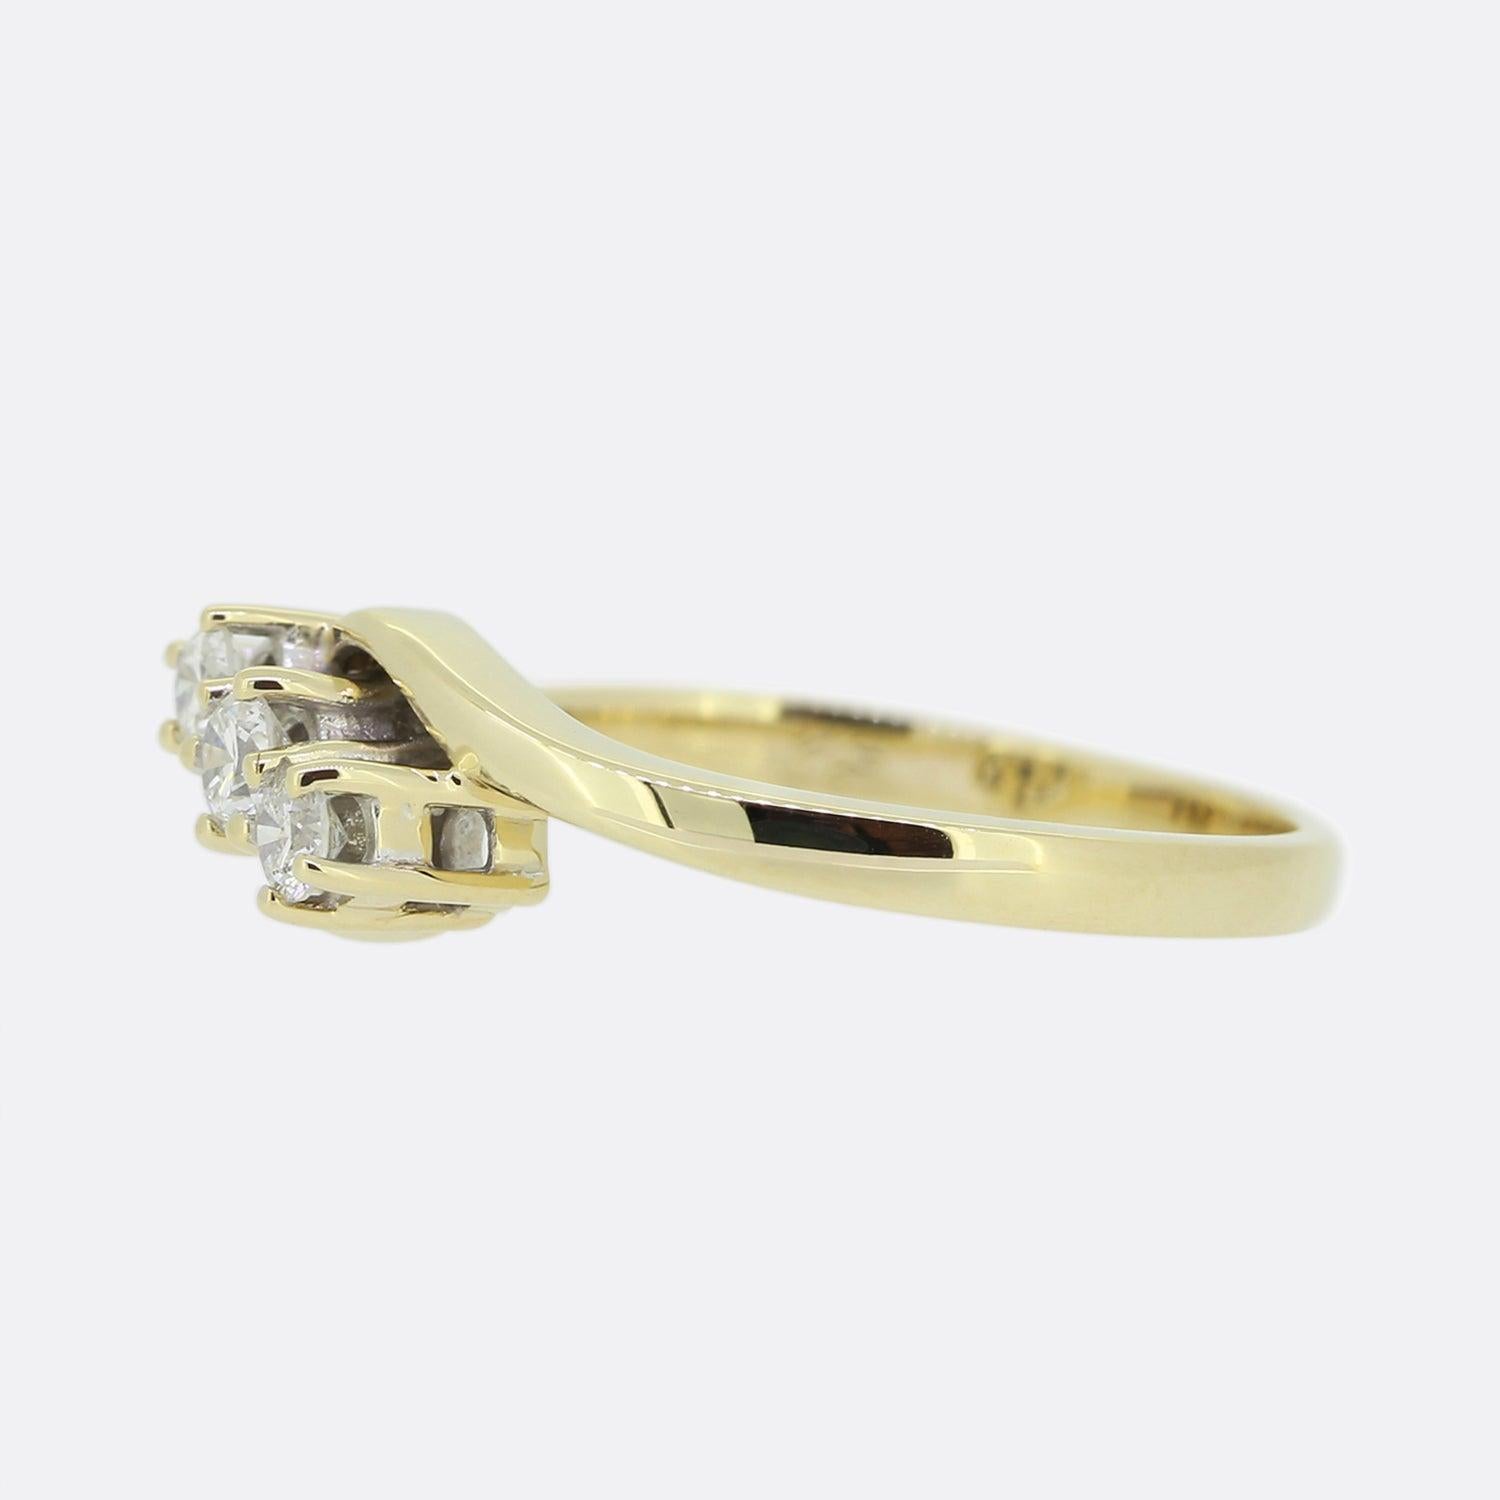 This is an 18ct yellow gold diamond three stone twist ring. The ring features three round brilliant cut diamonds which have been claw set at the centre of two elegant crossover bands. The diamonds are well matched for colour and clarity with the